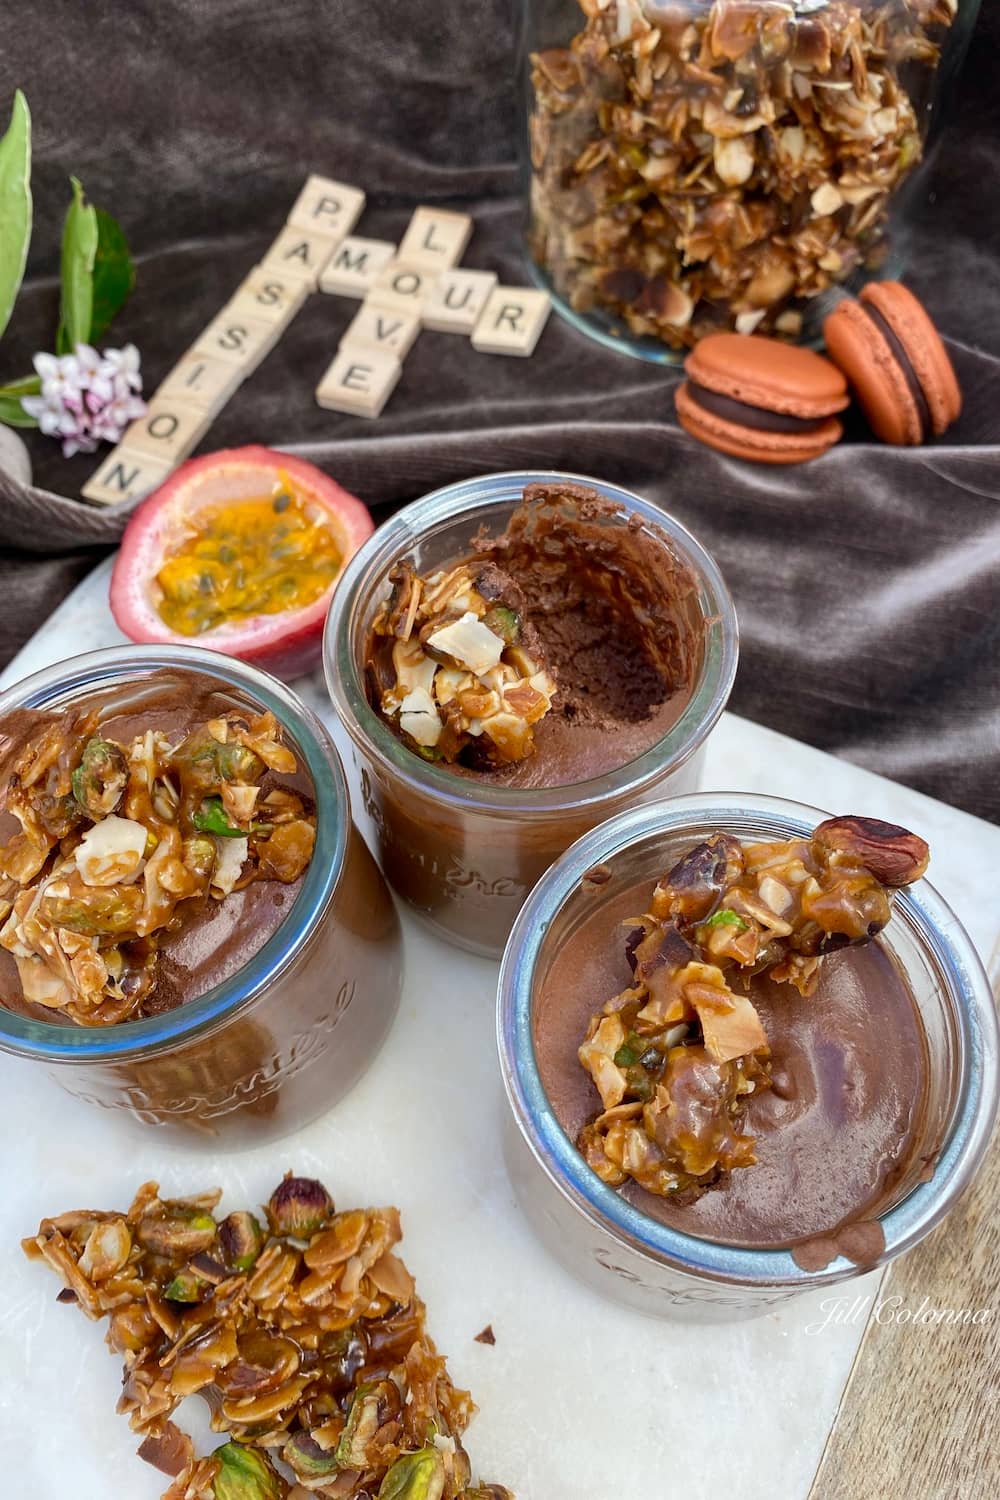 glass pots of chocolate mousse with caramel nougat, half a passionfruit